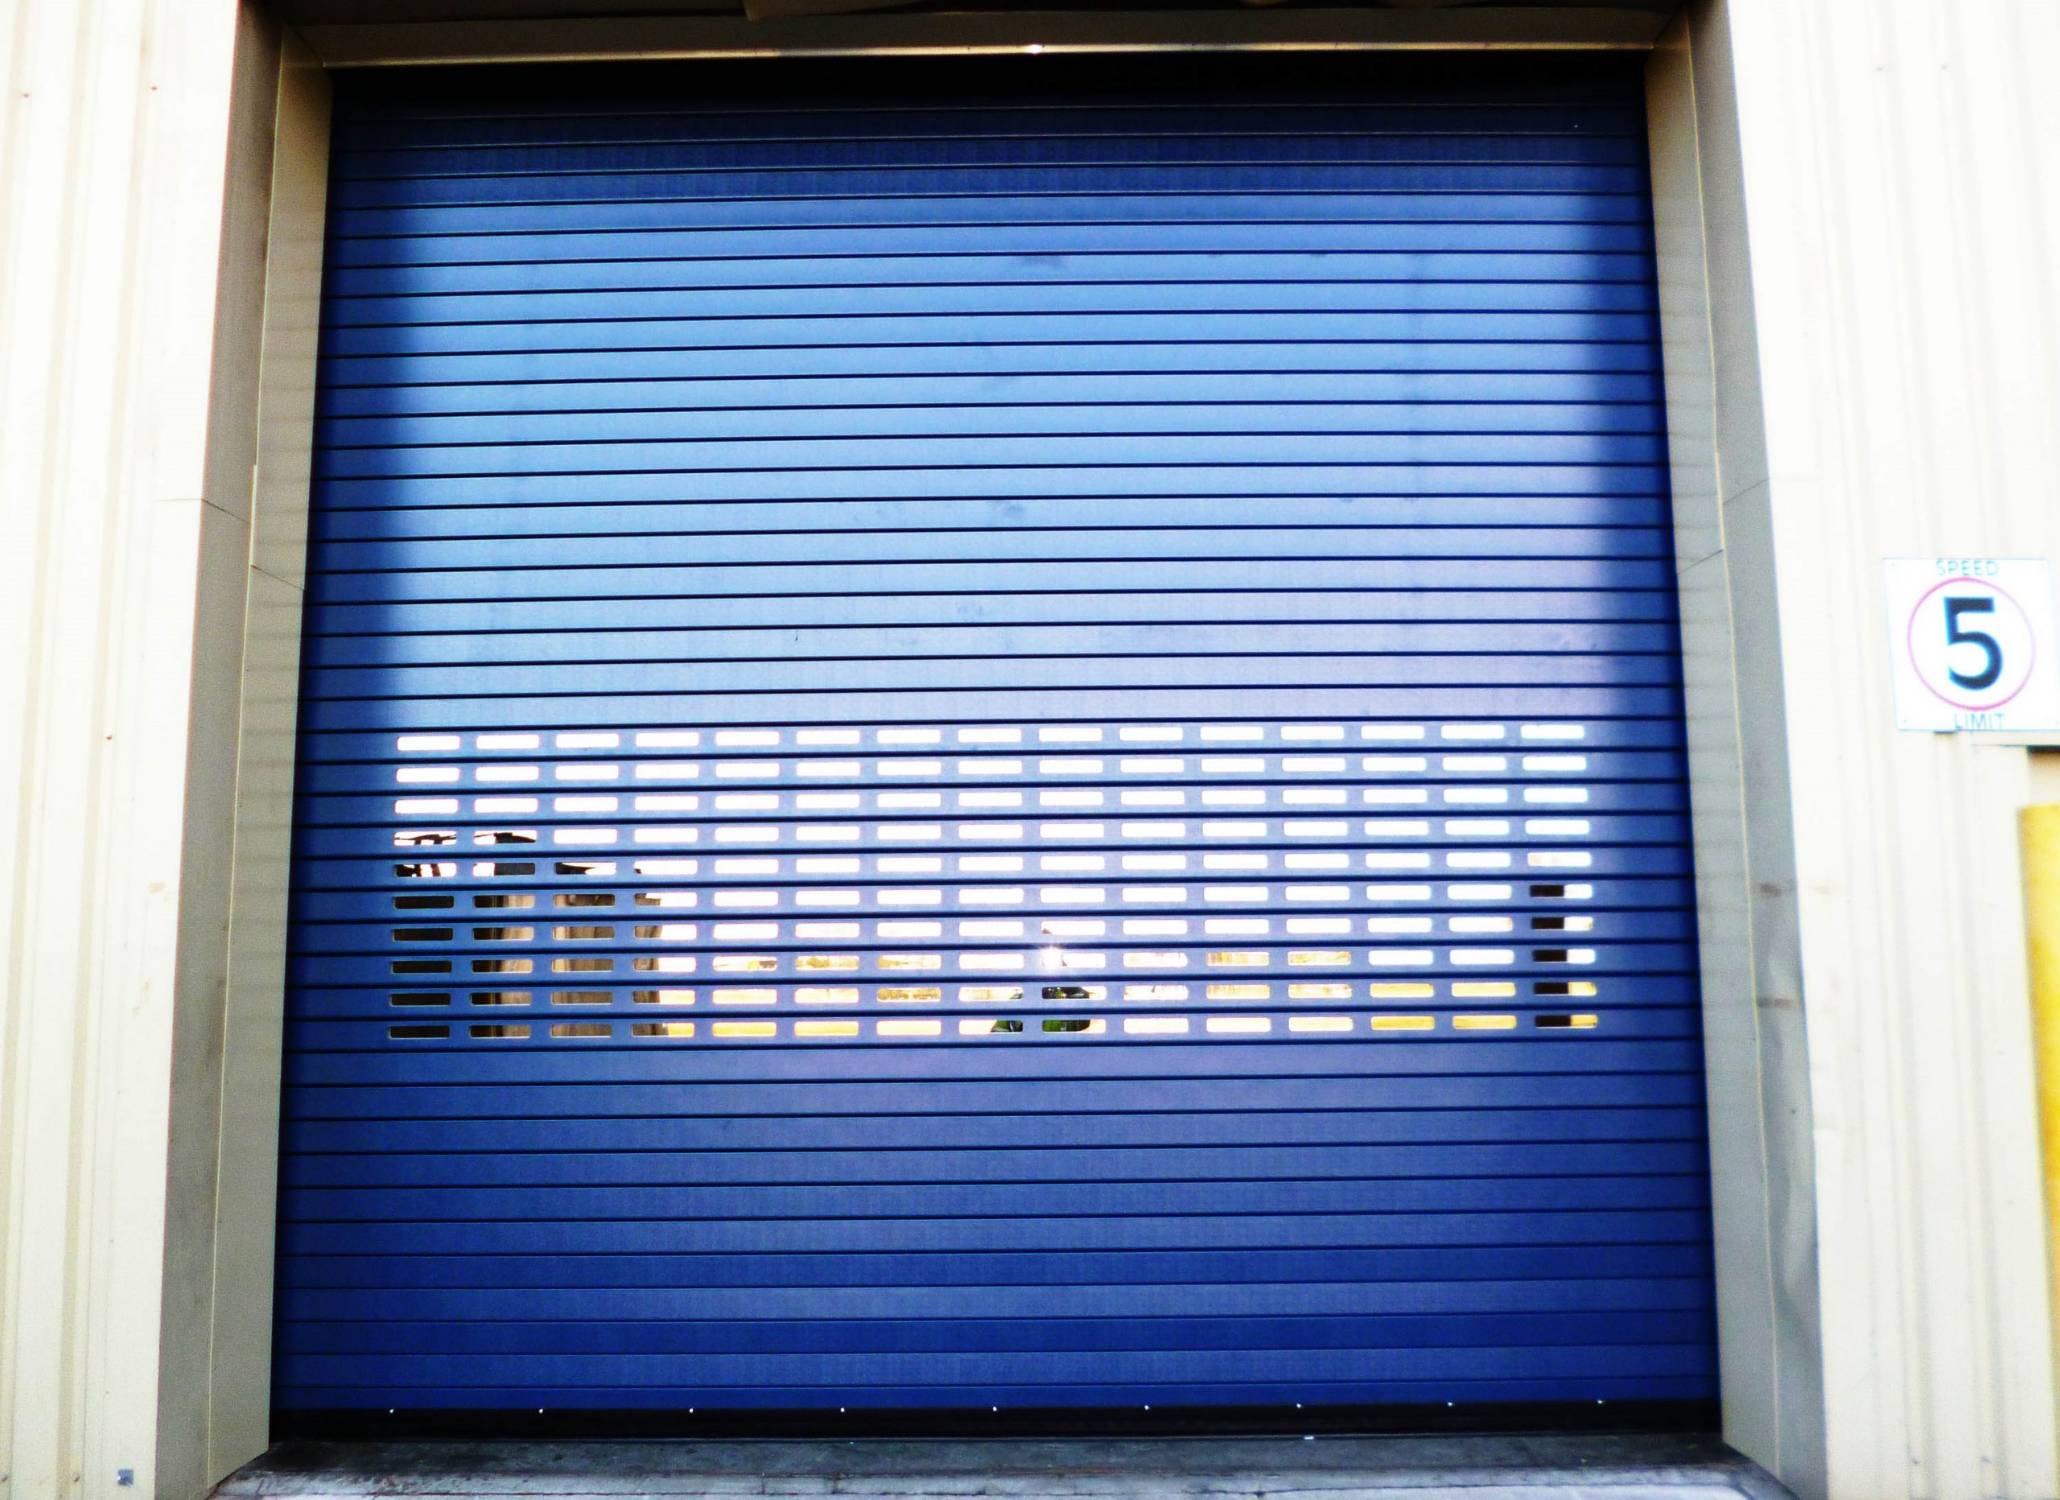 GLV11-INS100 18dB Sound Reduction (Estimated) Roller Shutters